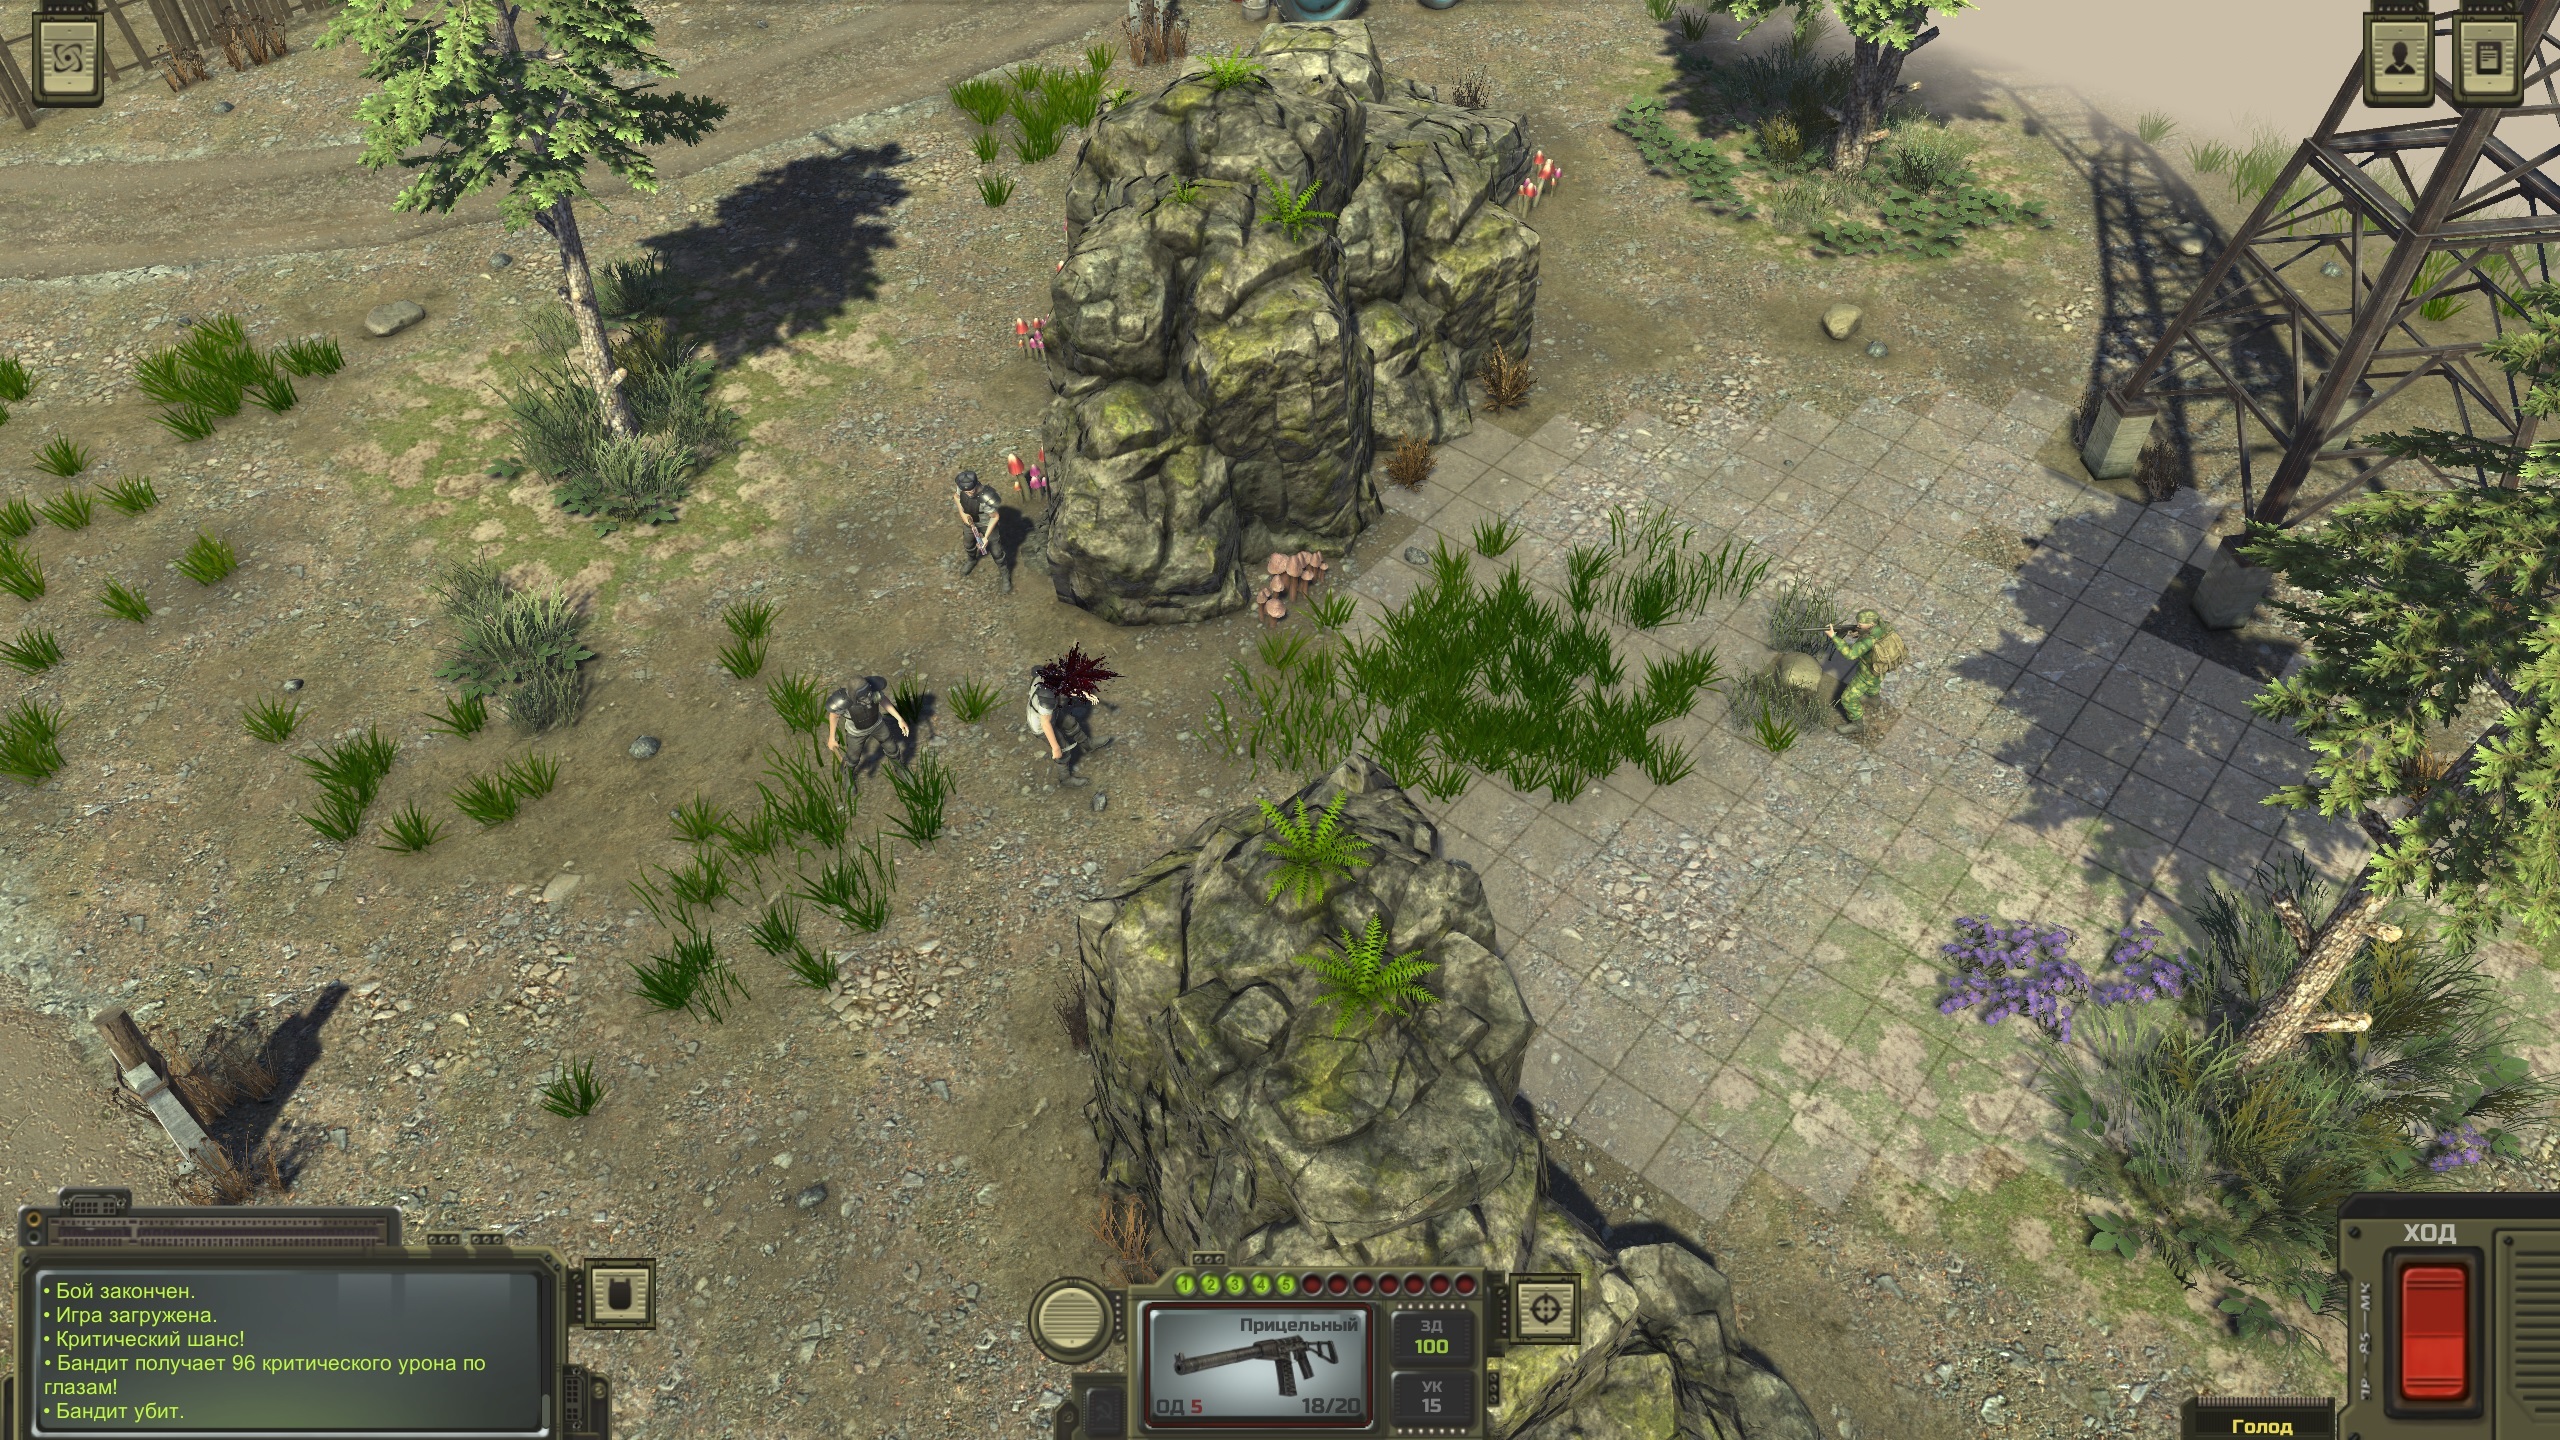 download atom rpg steam for free